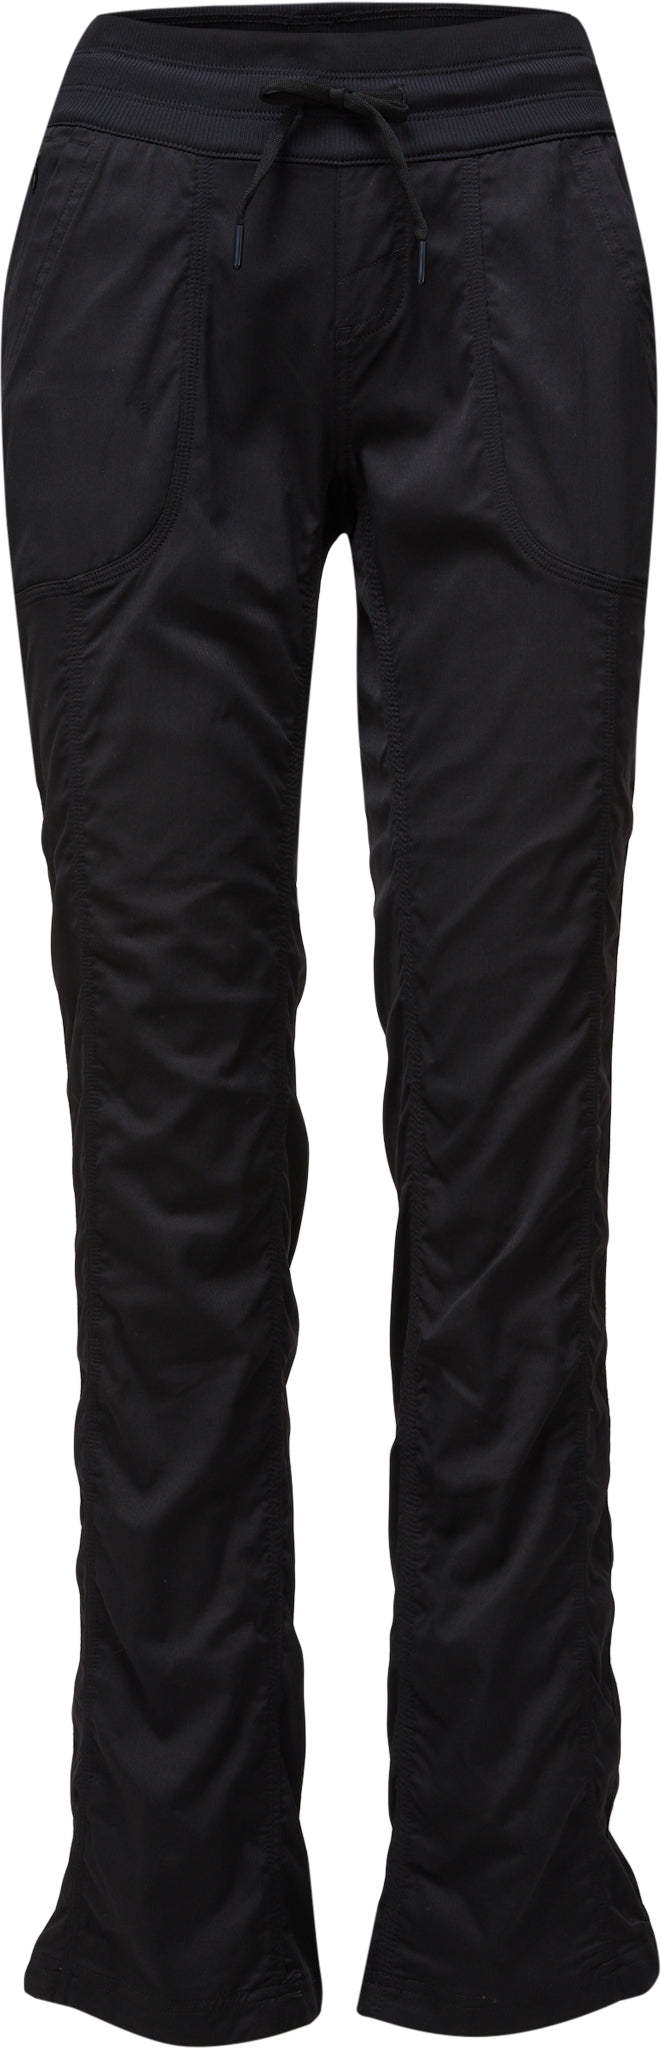 The North Face Easy nylon baggy pants in black